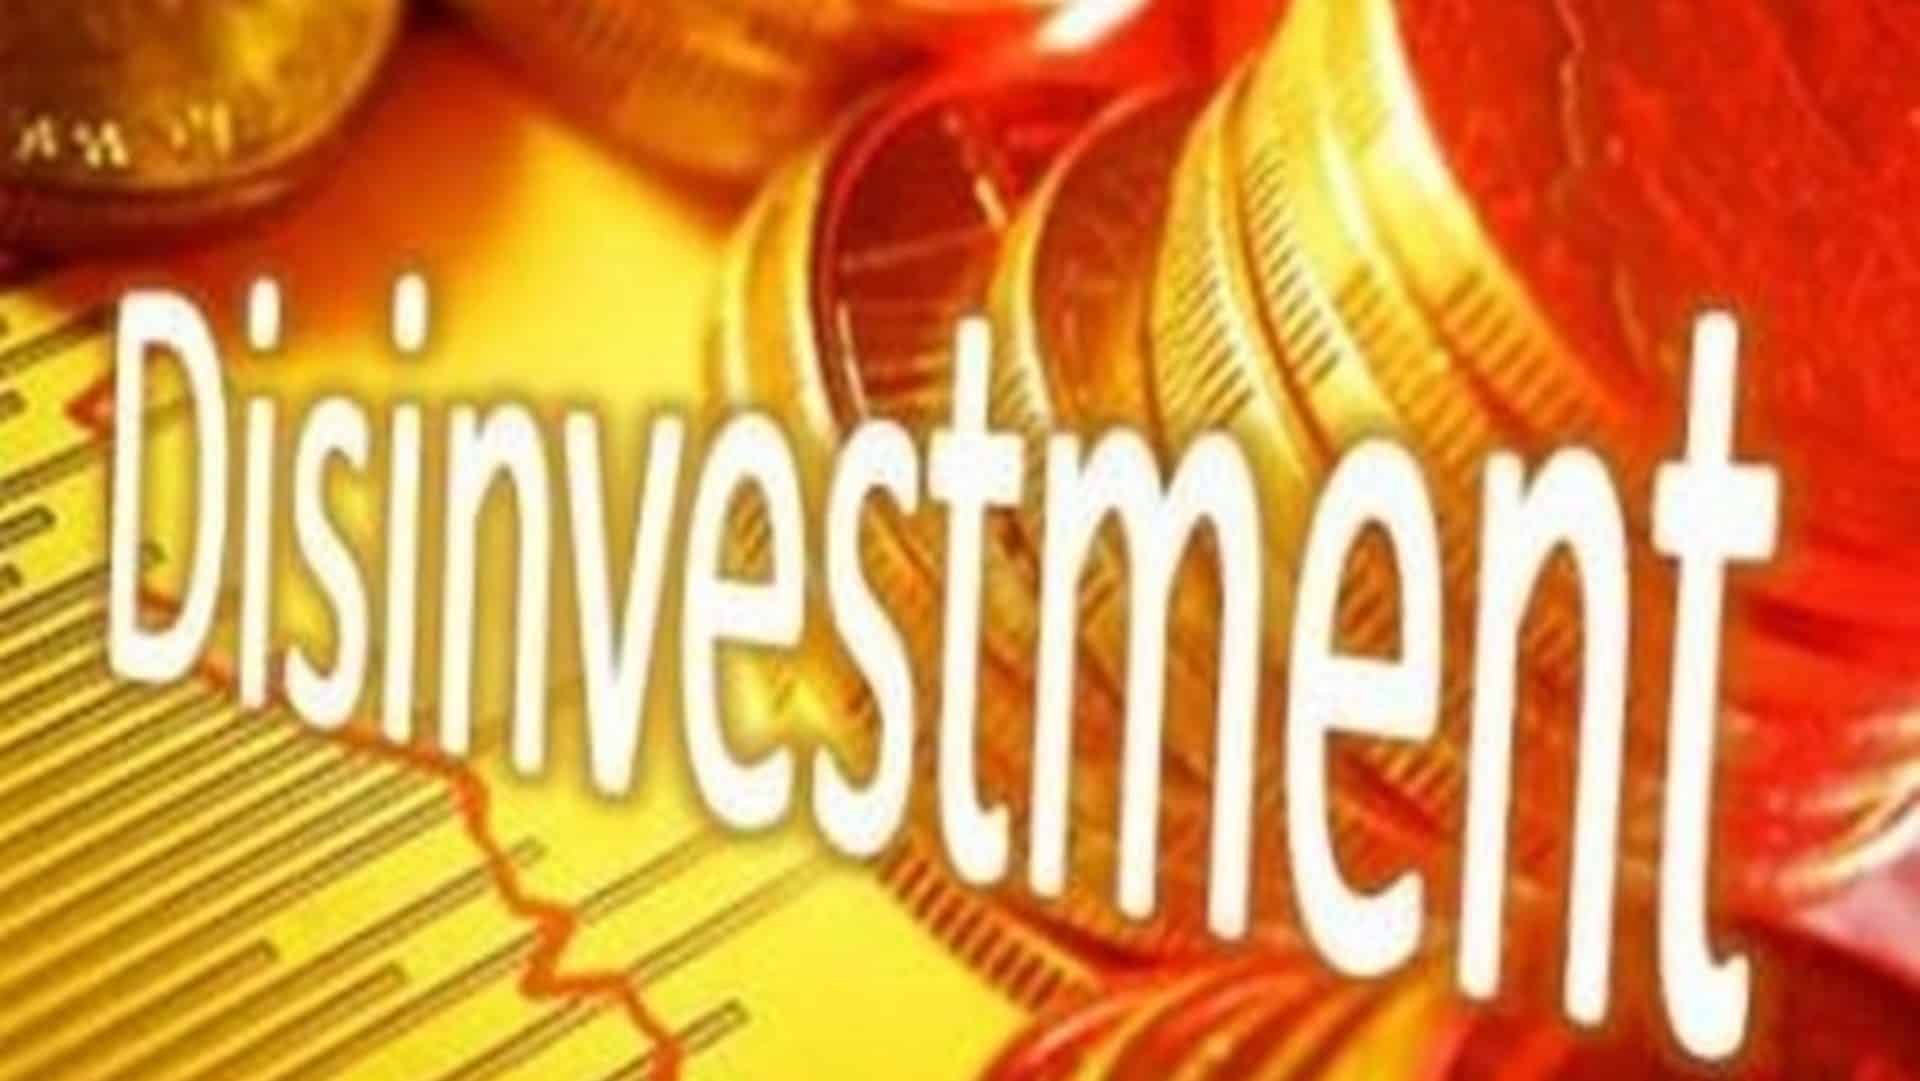 Draft cabinet note floated for 100% FDI in oil PSUs approved for disinvestment: Sources